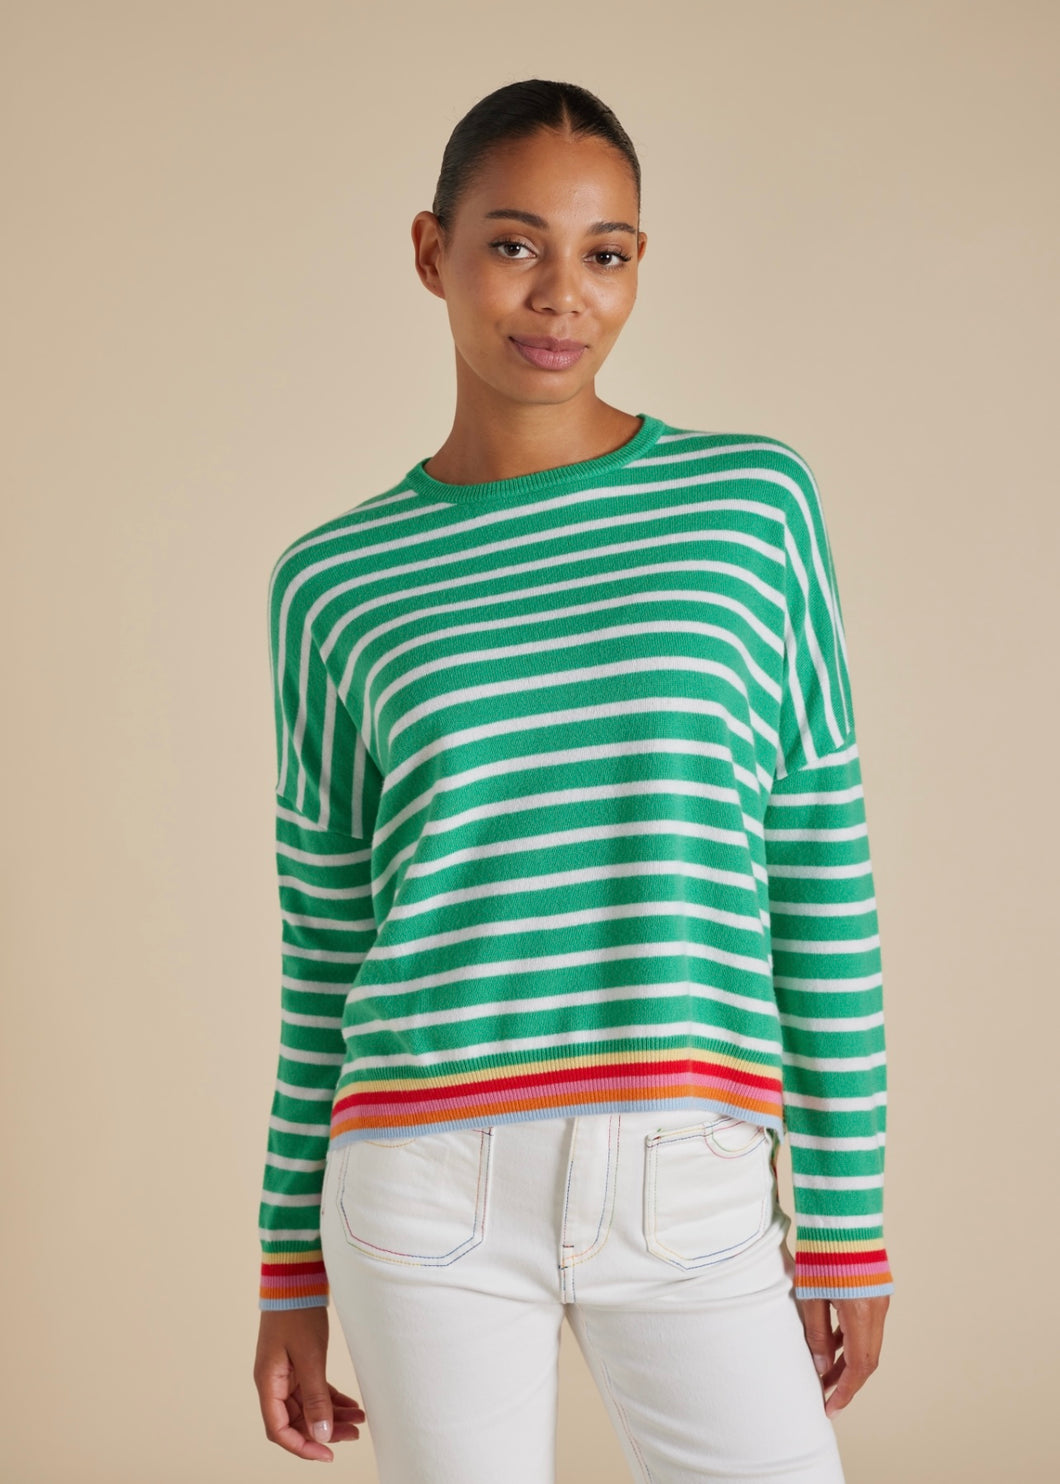 Colette Sweater in Pine by Alessandra